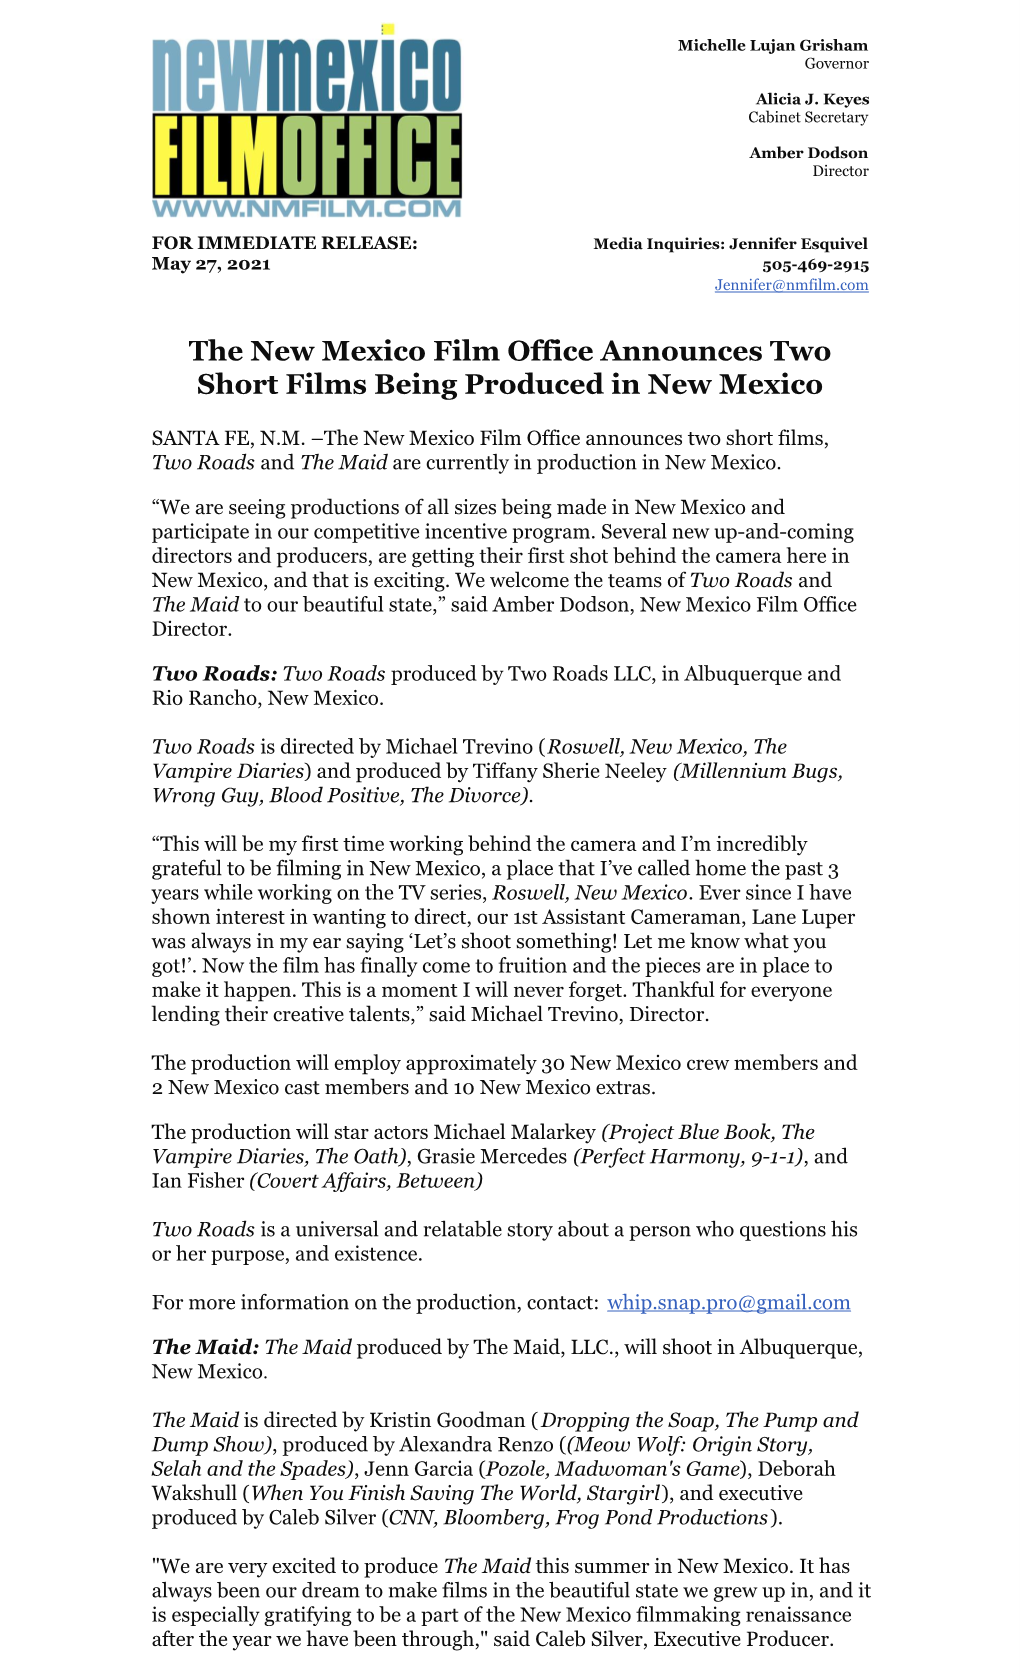 The New Mexico Film Office Announces Two Short Films Being Produced in New Mexico